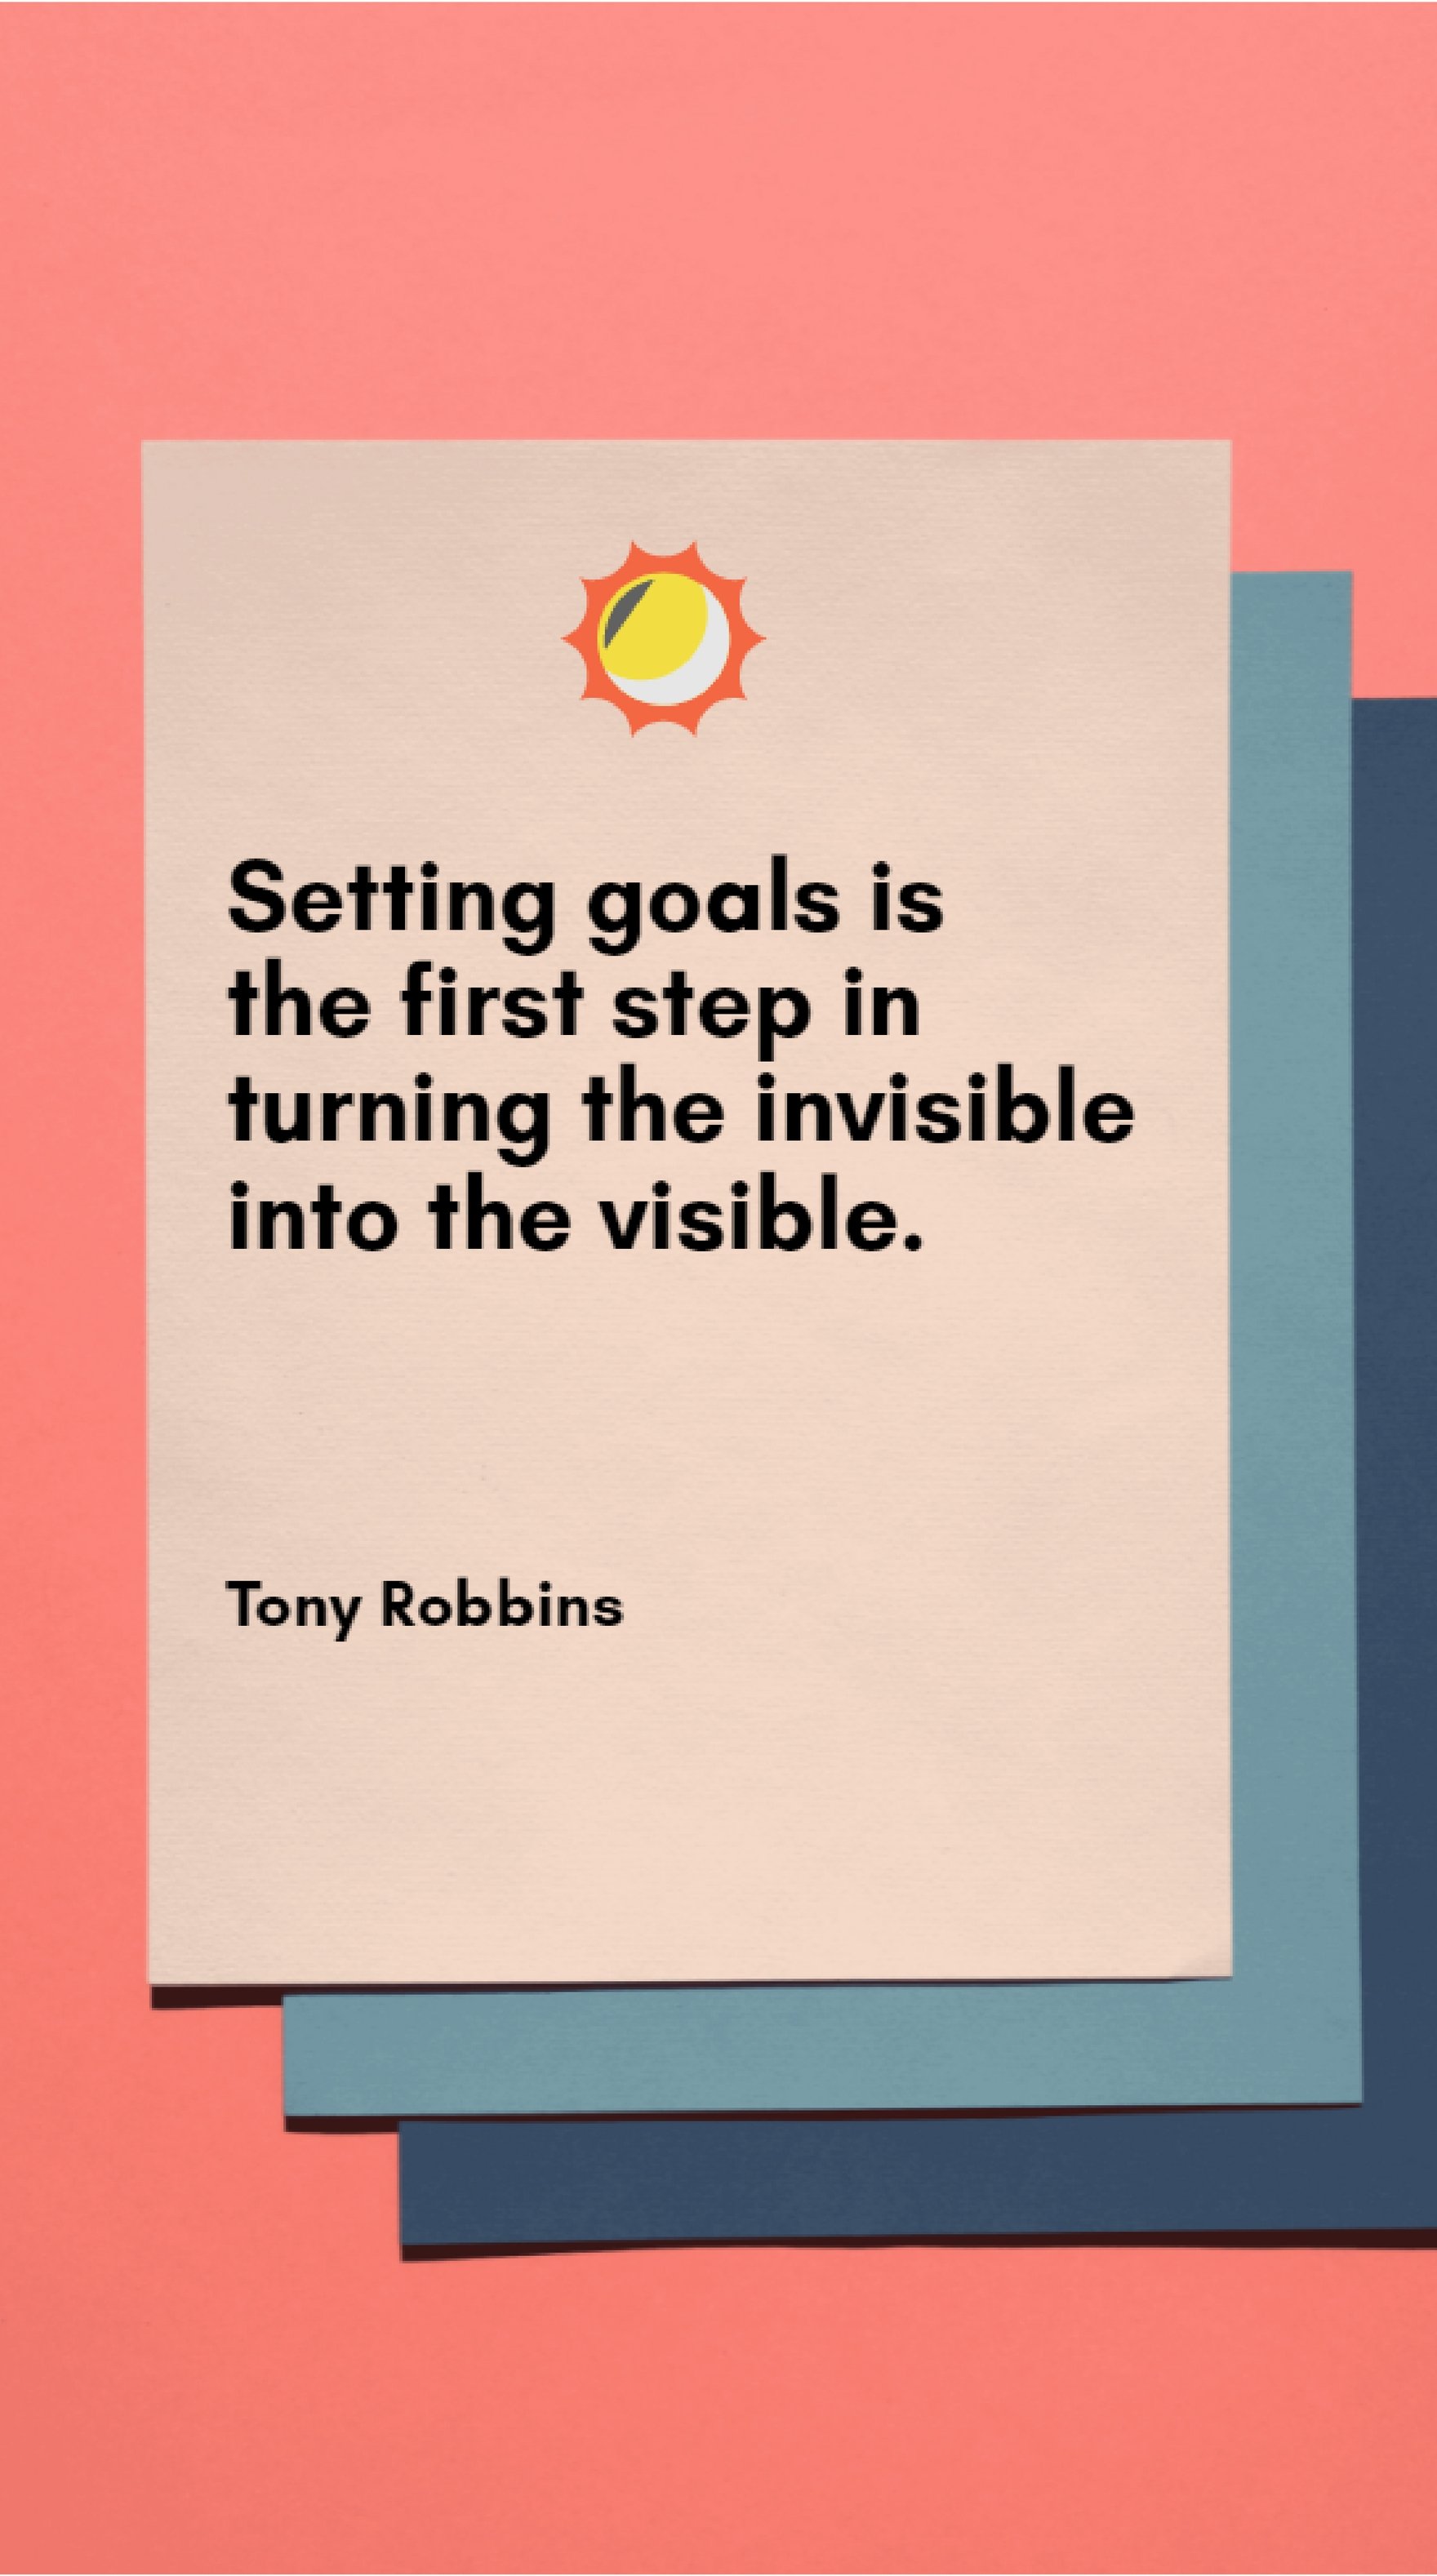 Tony Robbins - Setting goals is the first step in turning the invisible into the visible. Template